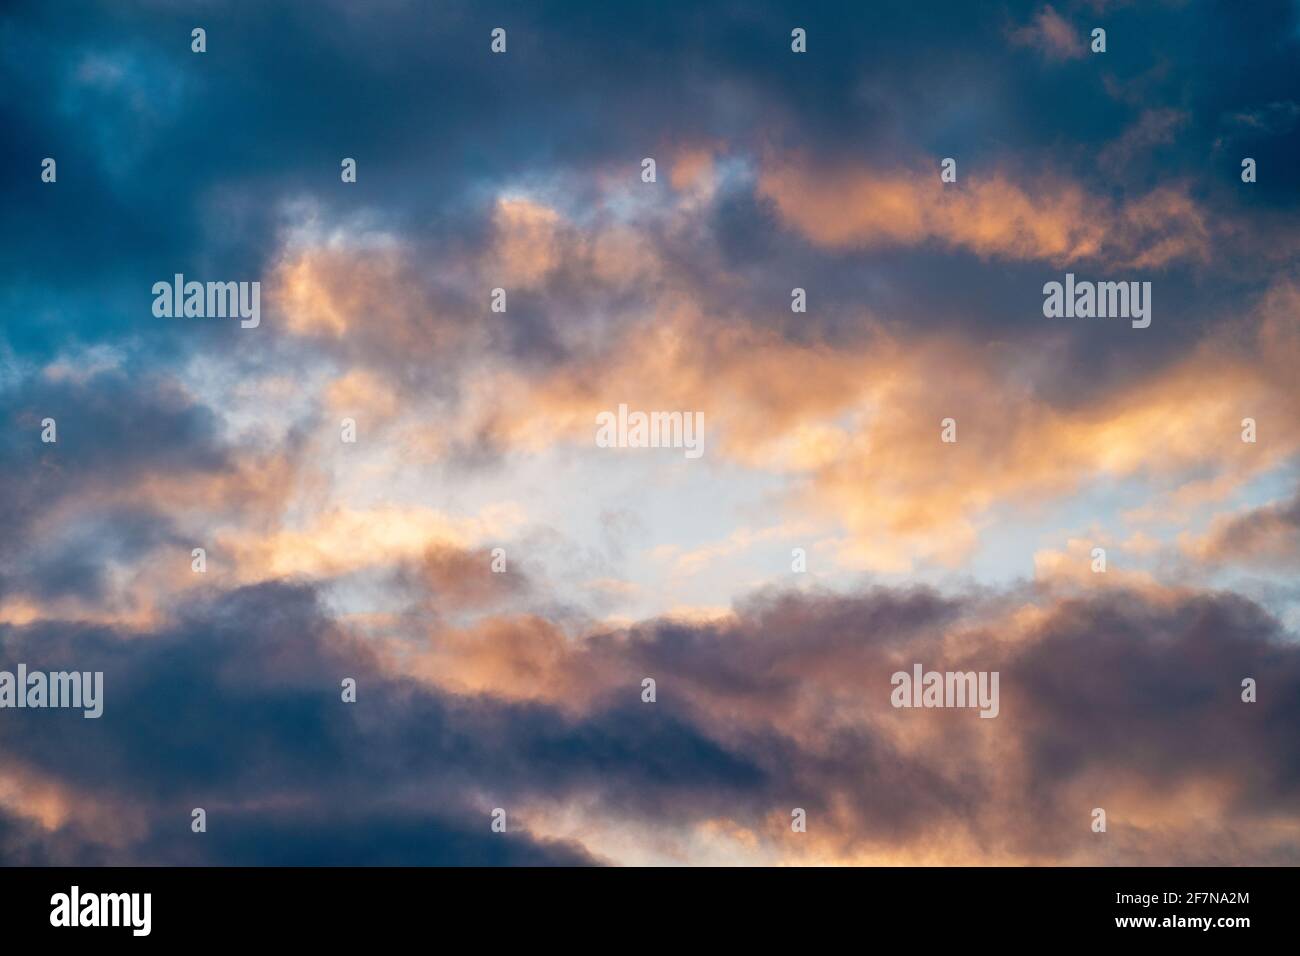 Colorful cloudy sky background, sunset cloudscape with blue overcast as frame and and light yellow-orange heaven in center, abstract nature background copy space. Stock Photo